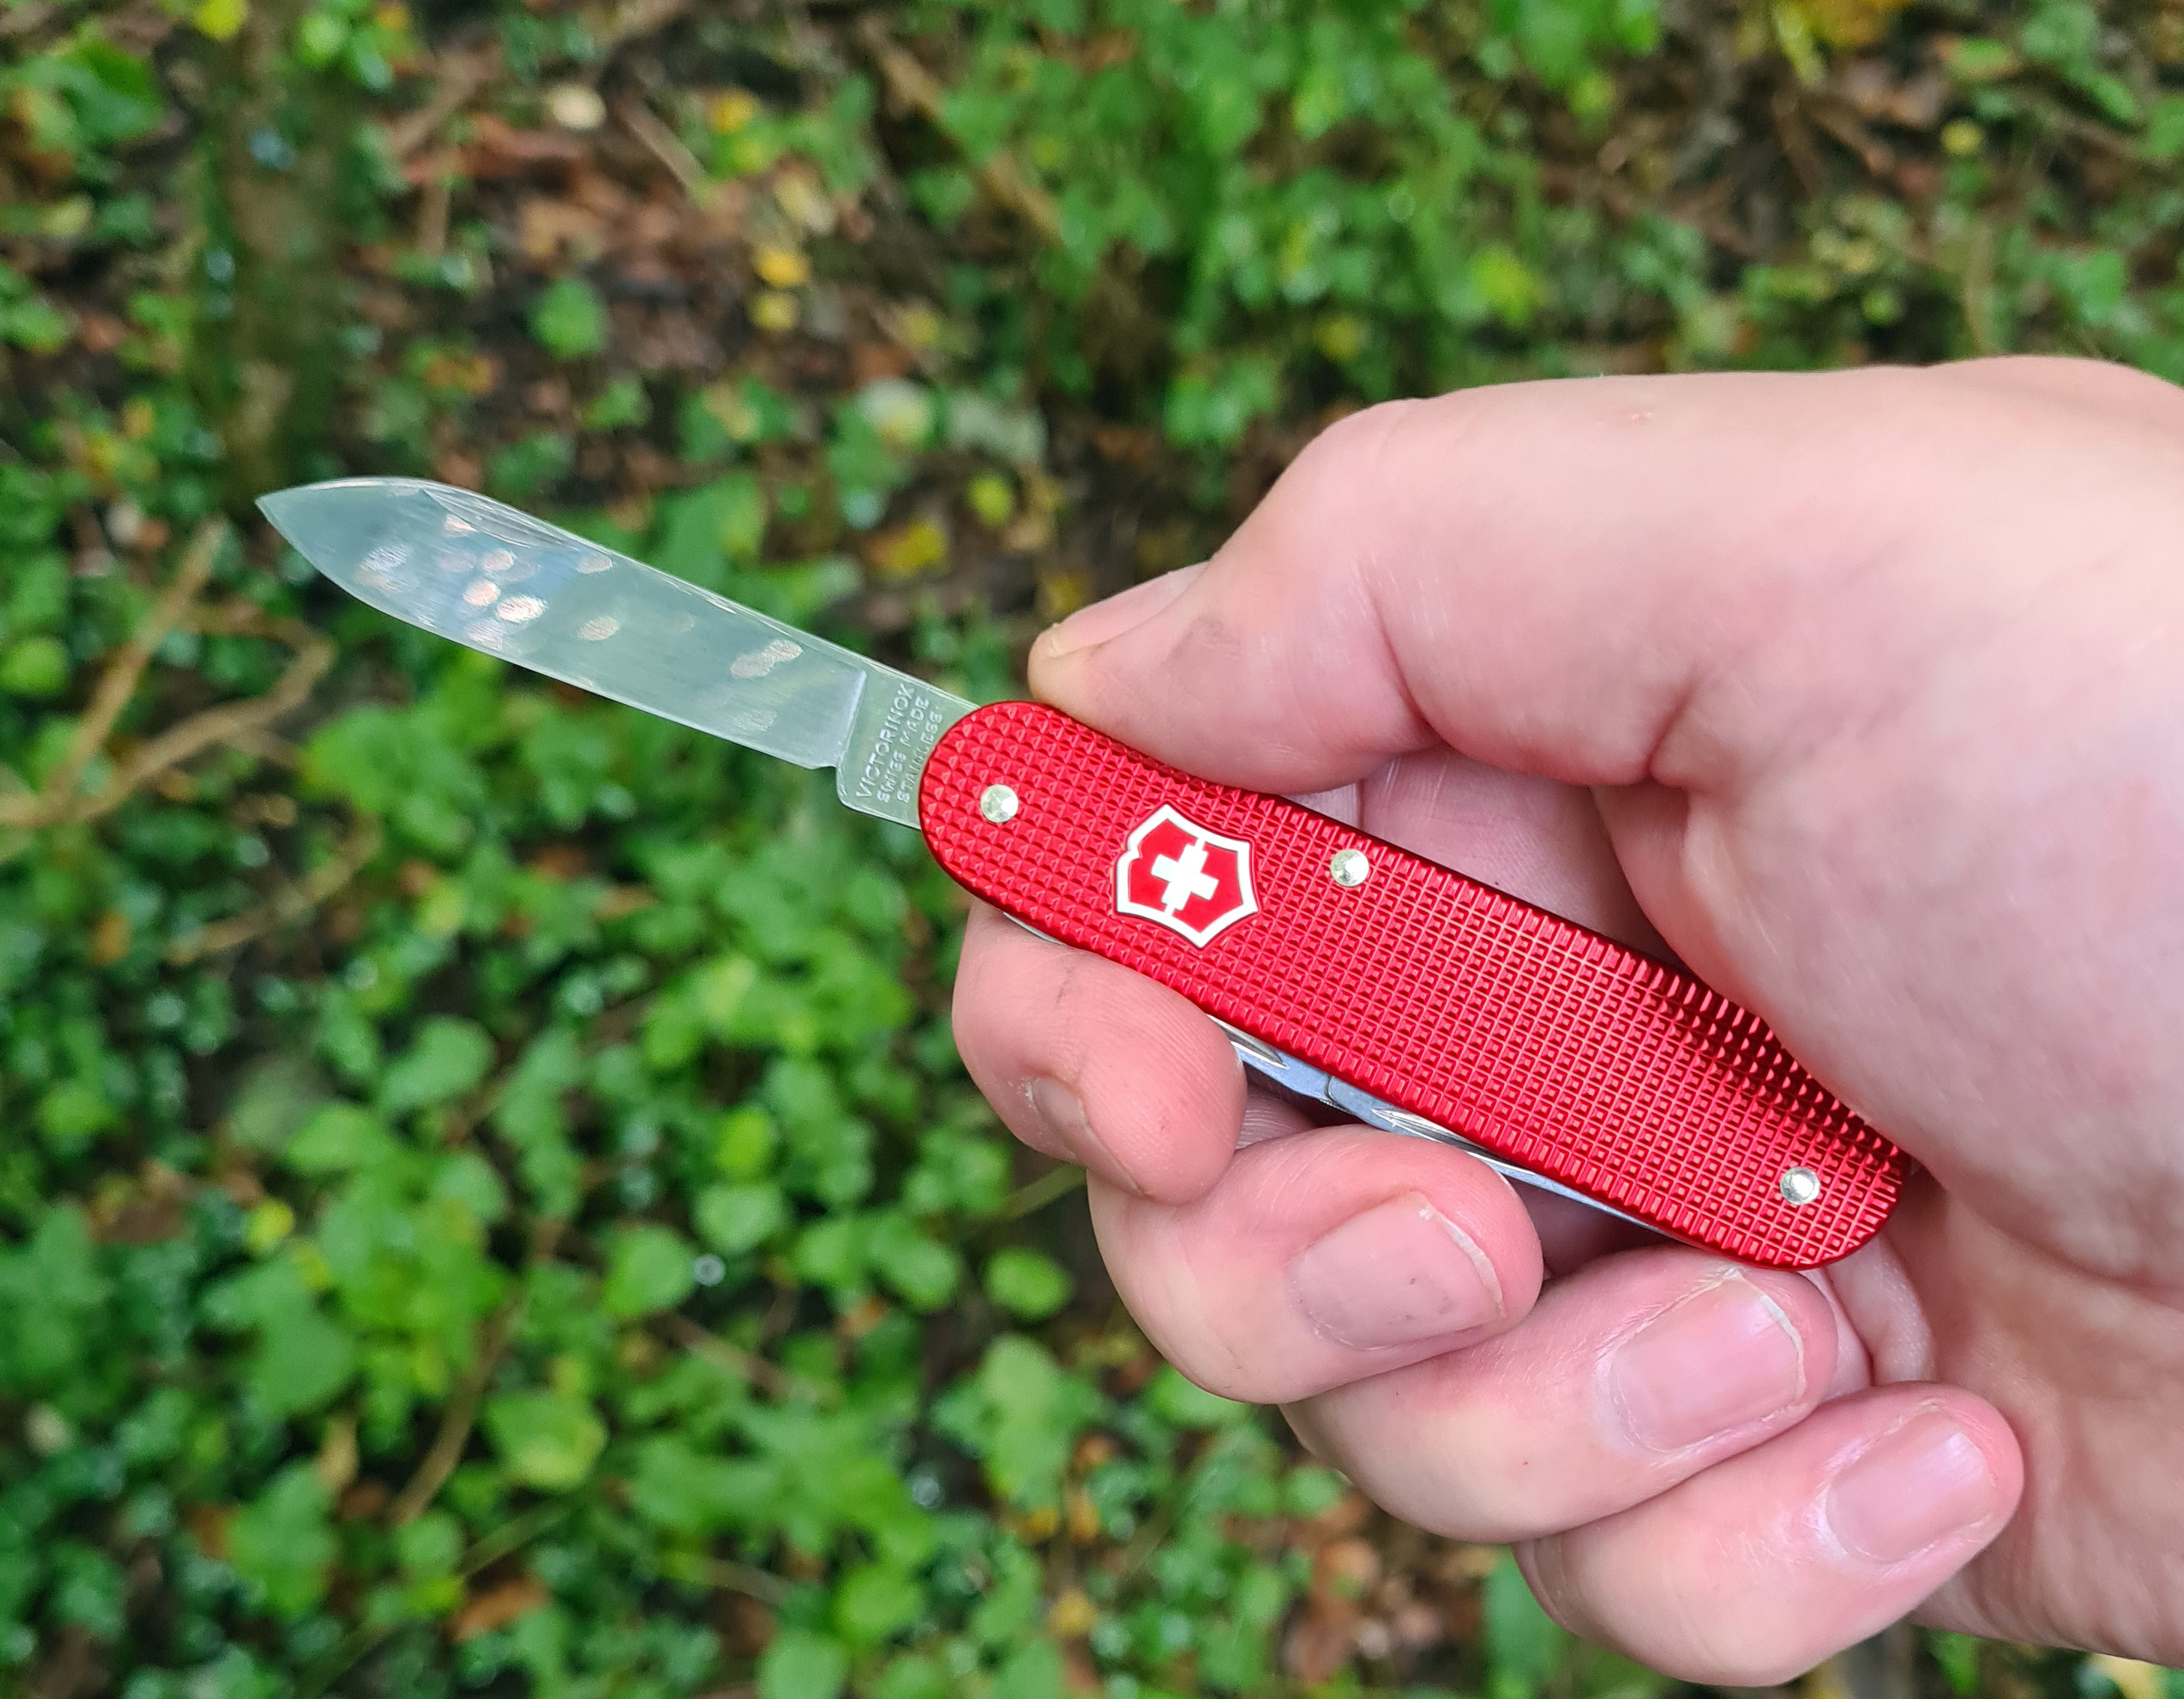 The same size large blade is found on both Alox Bantam and Cadet. The slim knife fits comfortably into the hand